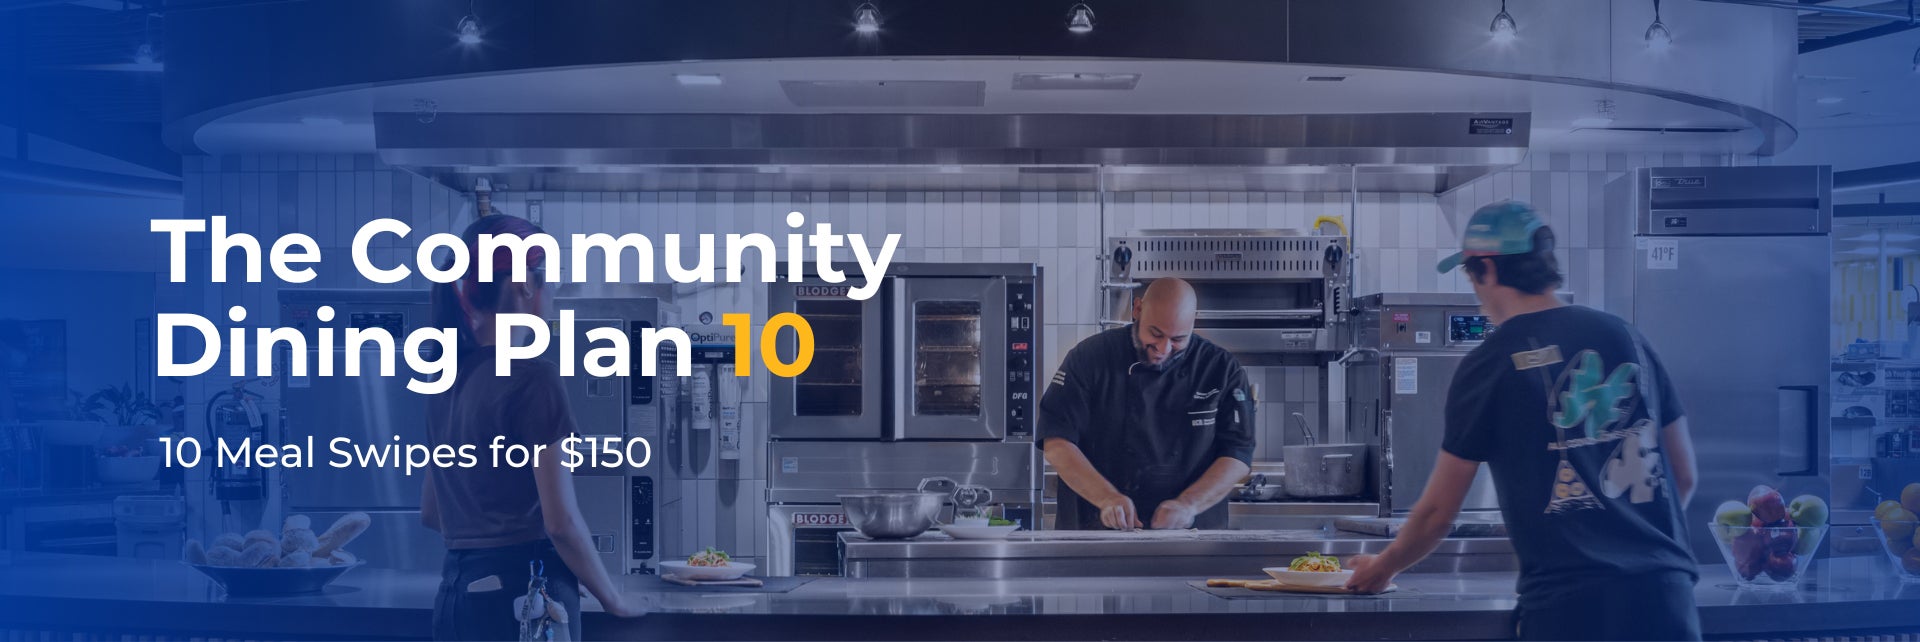 The Community Dining Plan10, 10 Meal Swipes for $150